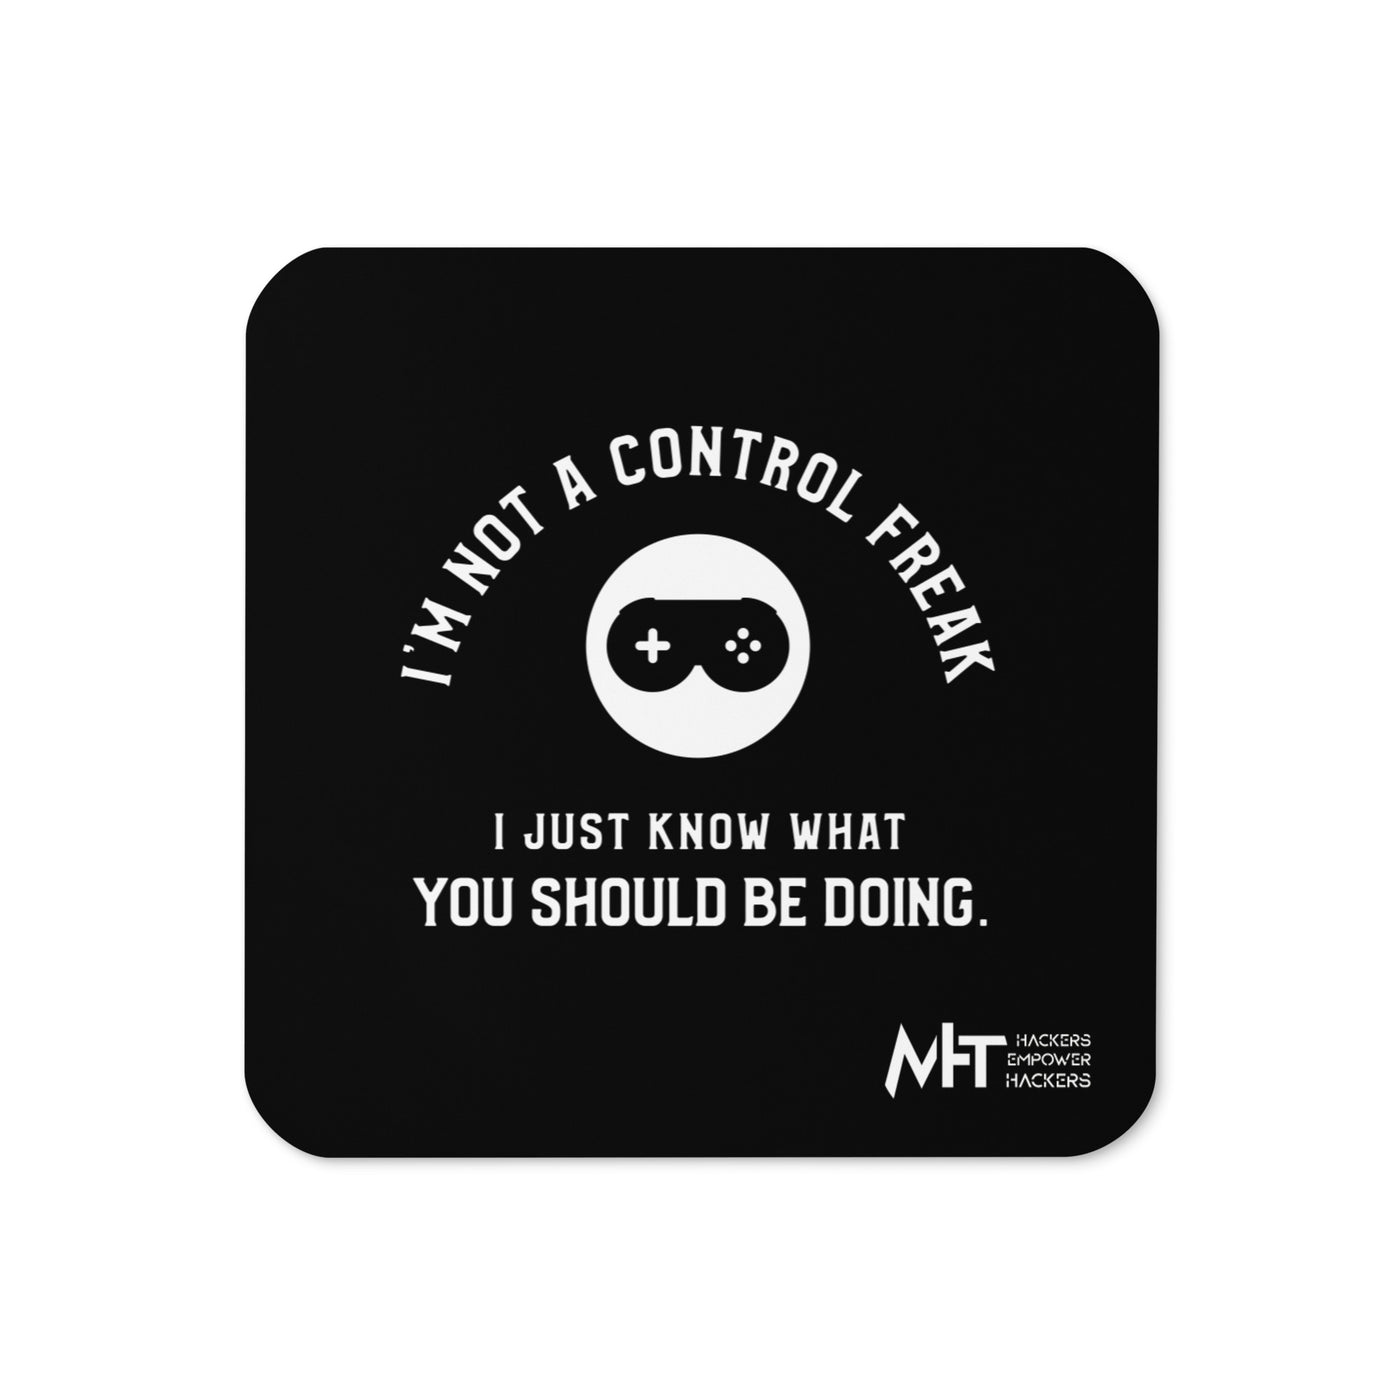 I am not a Control freak, I just Know what you should be doing - Cork-back coaster